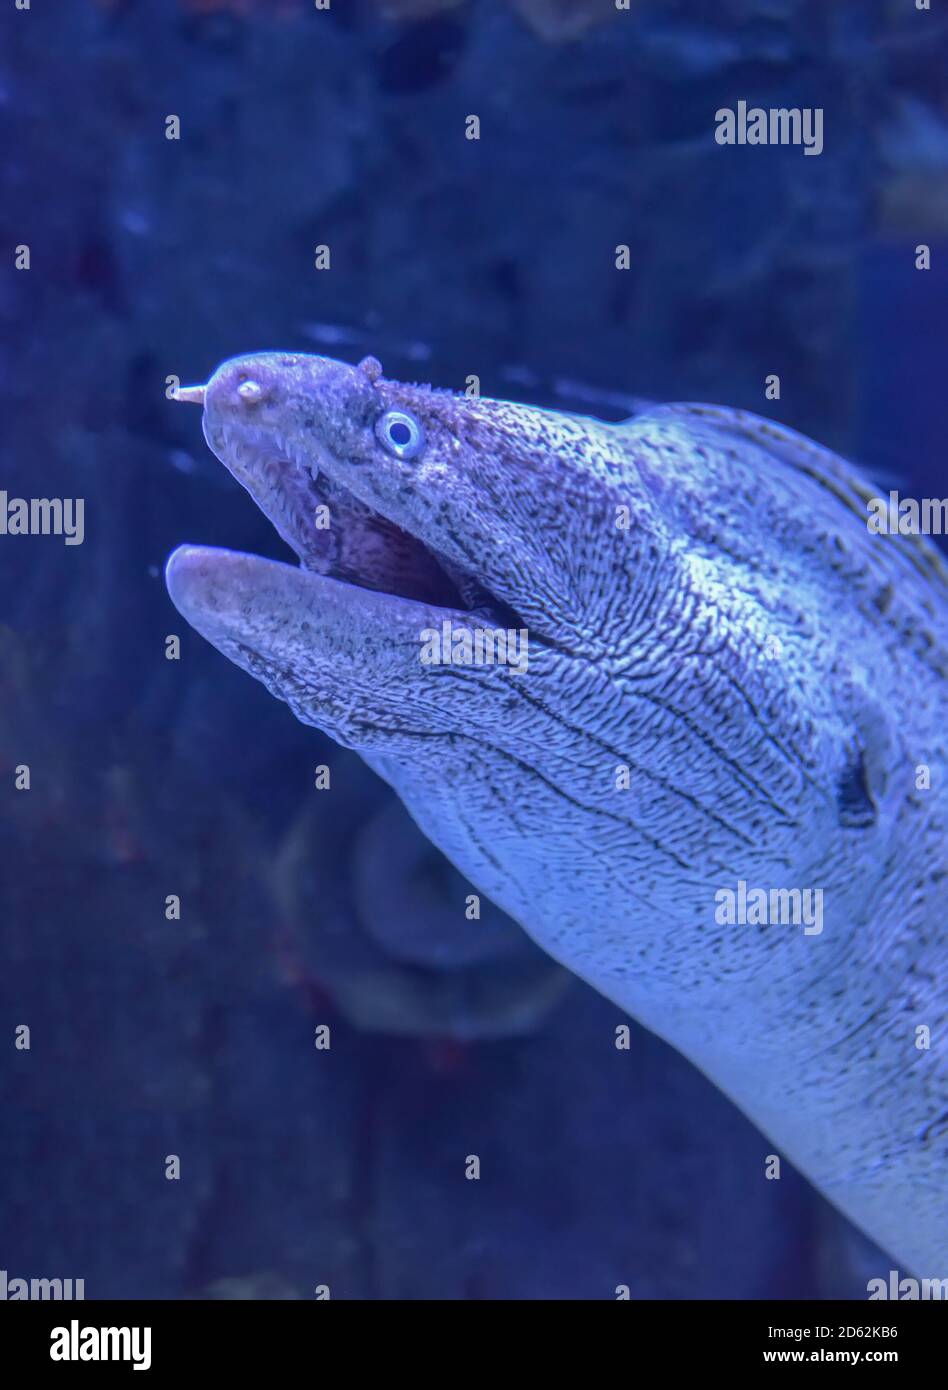 The head of moray eel under the water close up Stock Photo